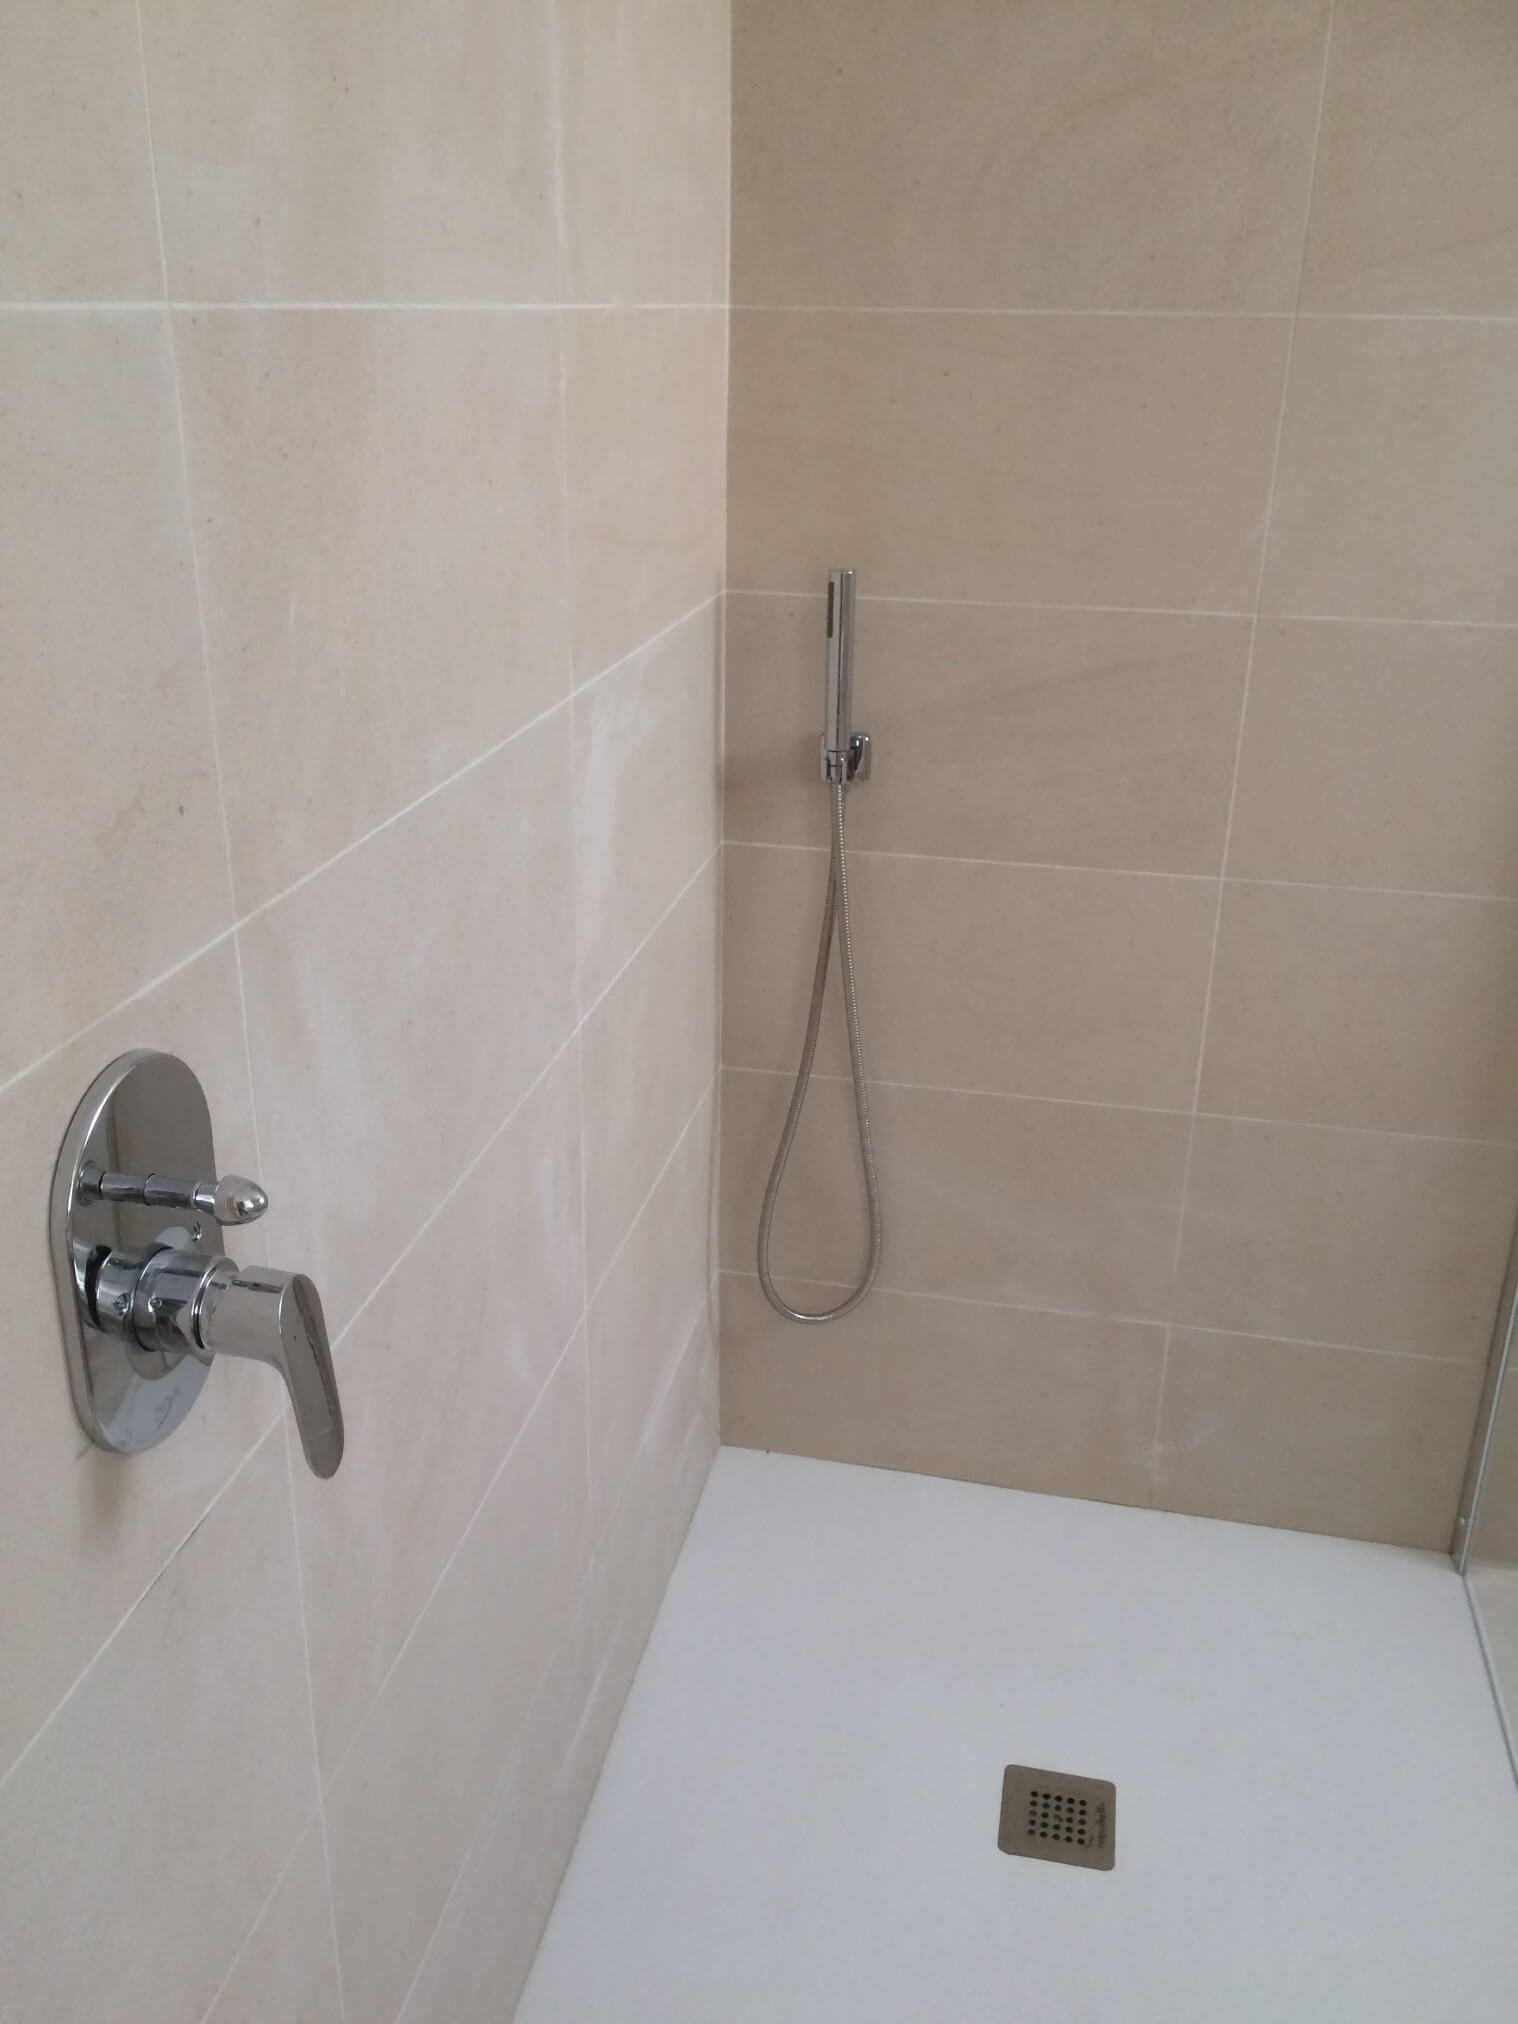 Shower drain and controls